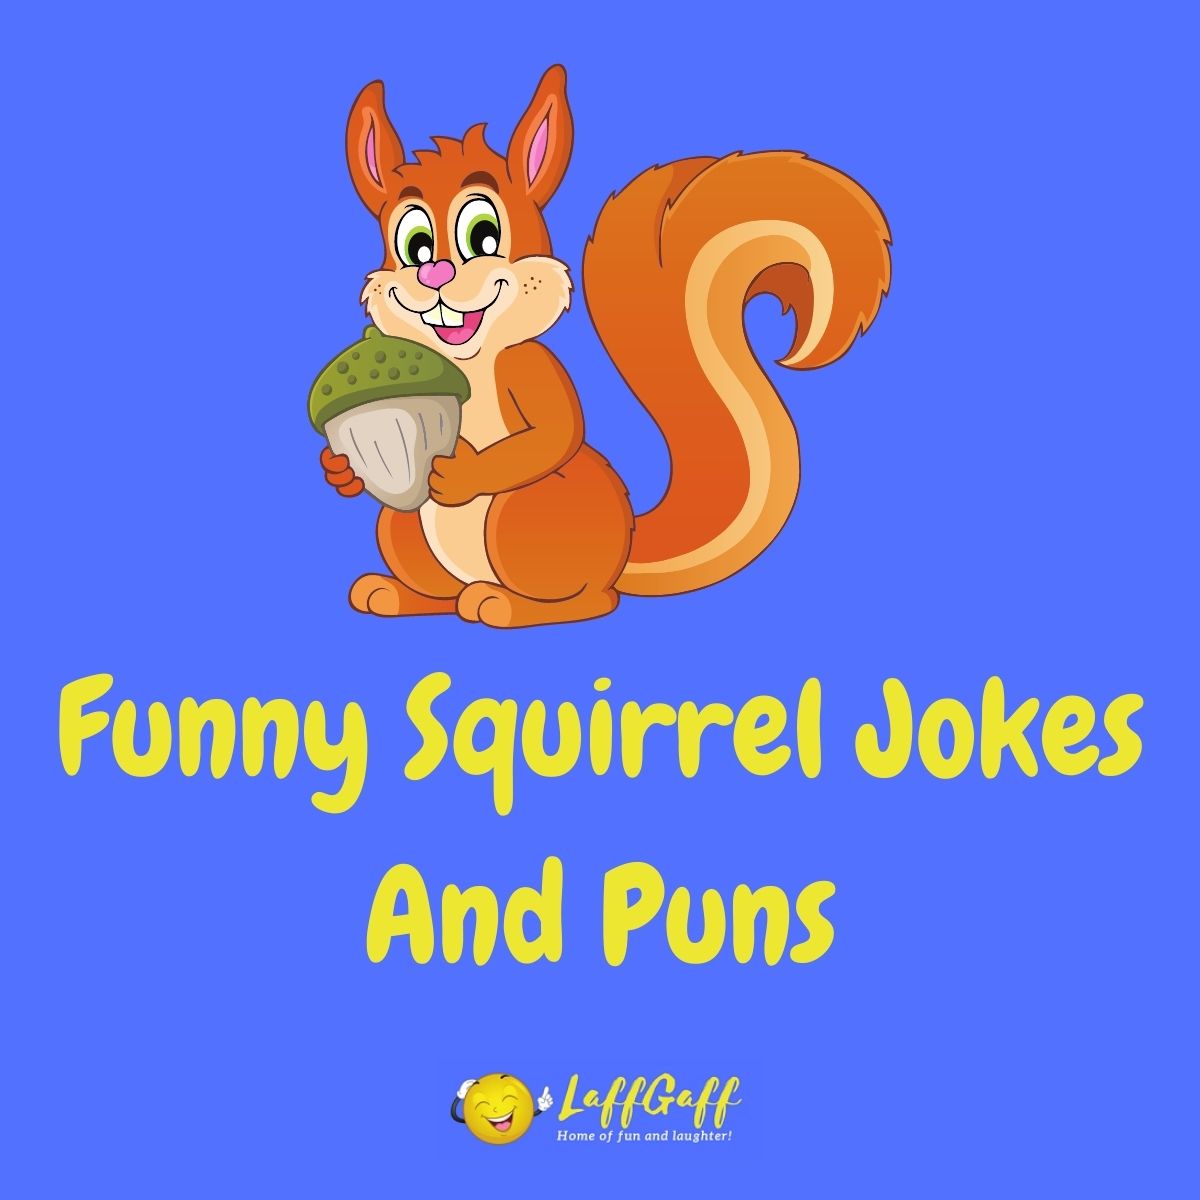 Featured image for a page of funny squirrel jokes and puns.